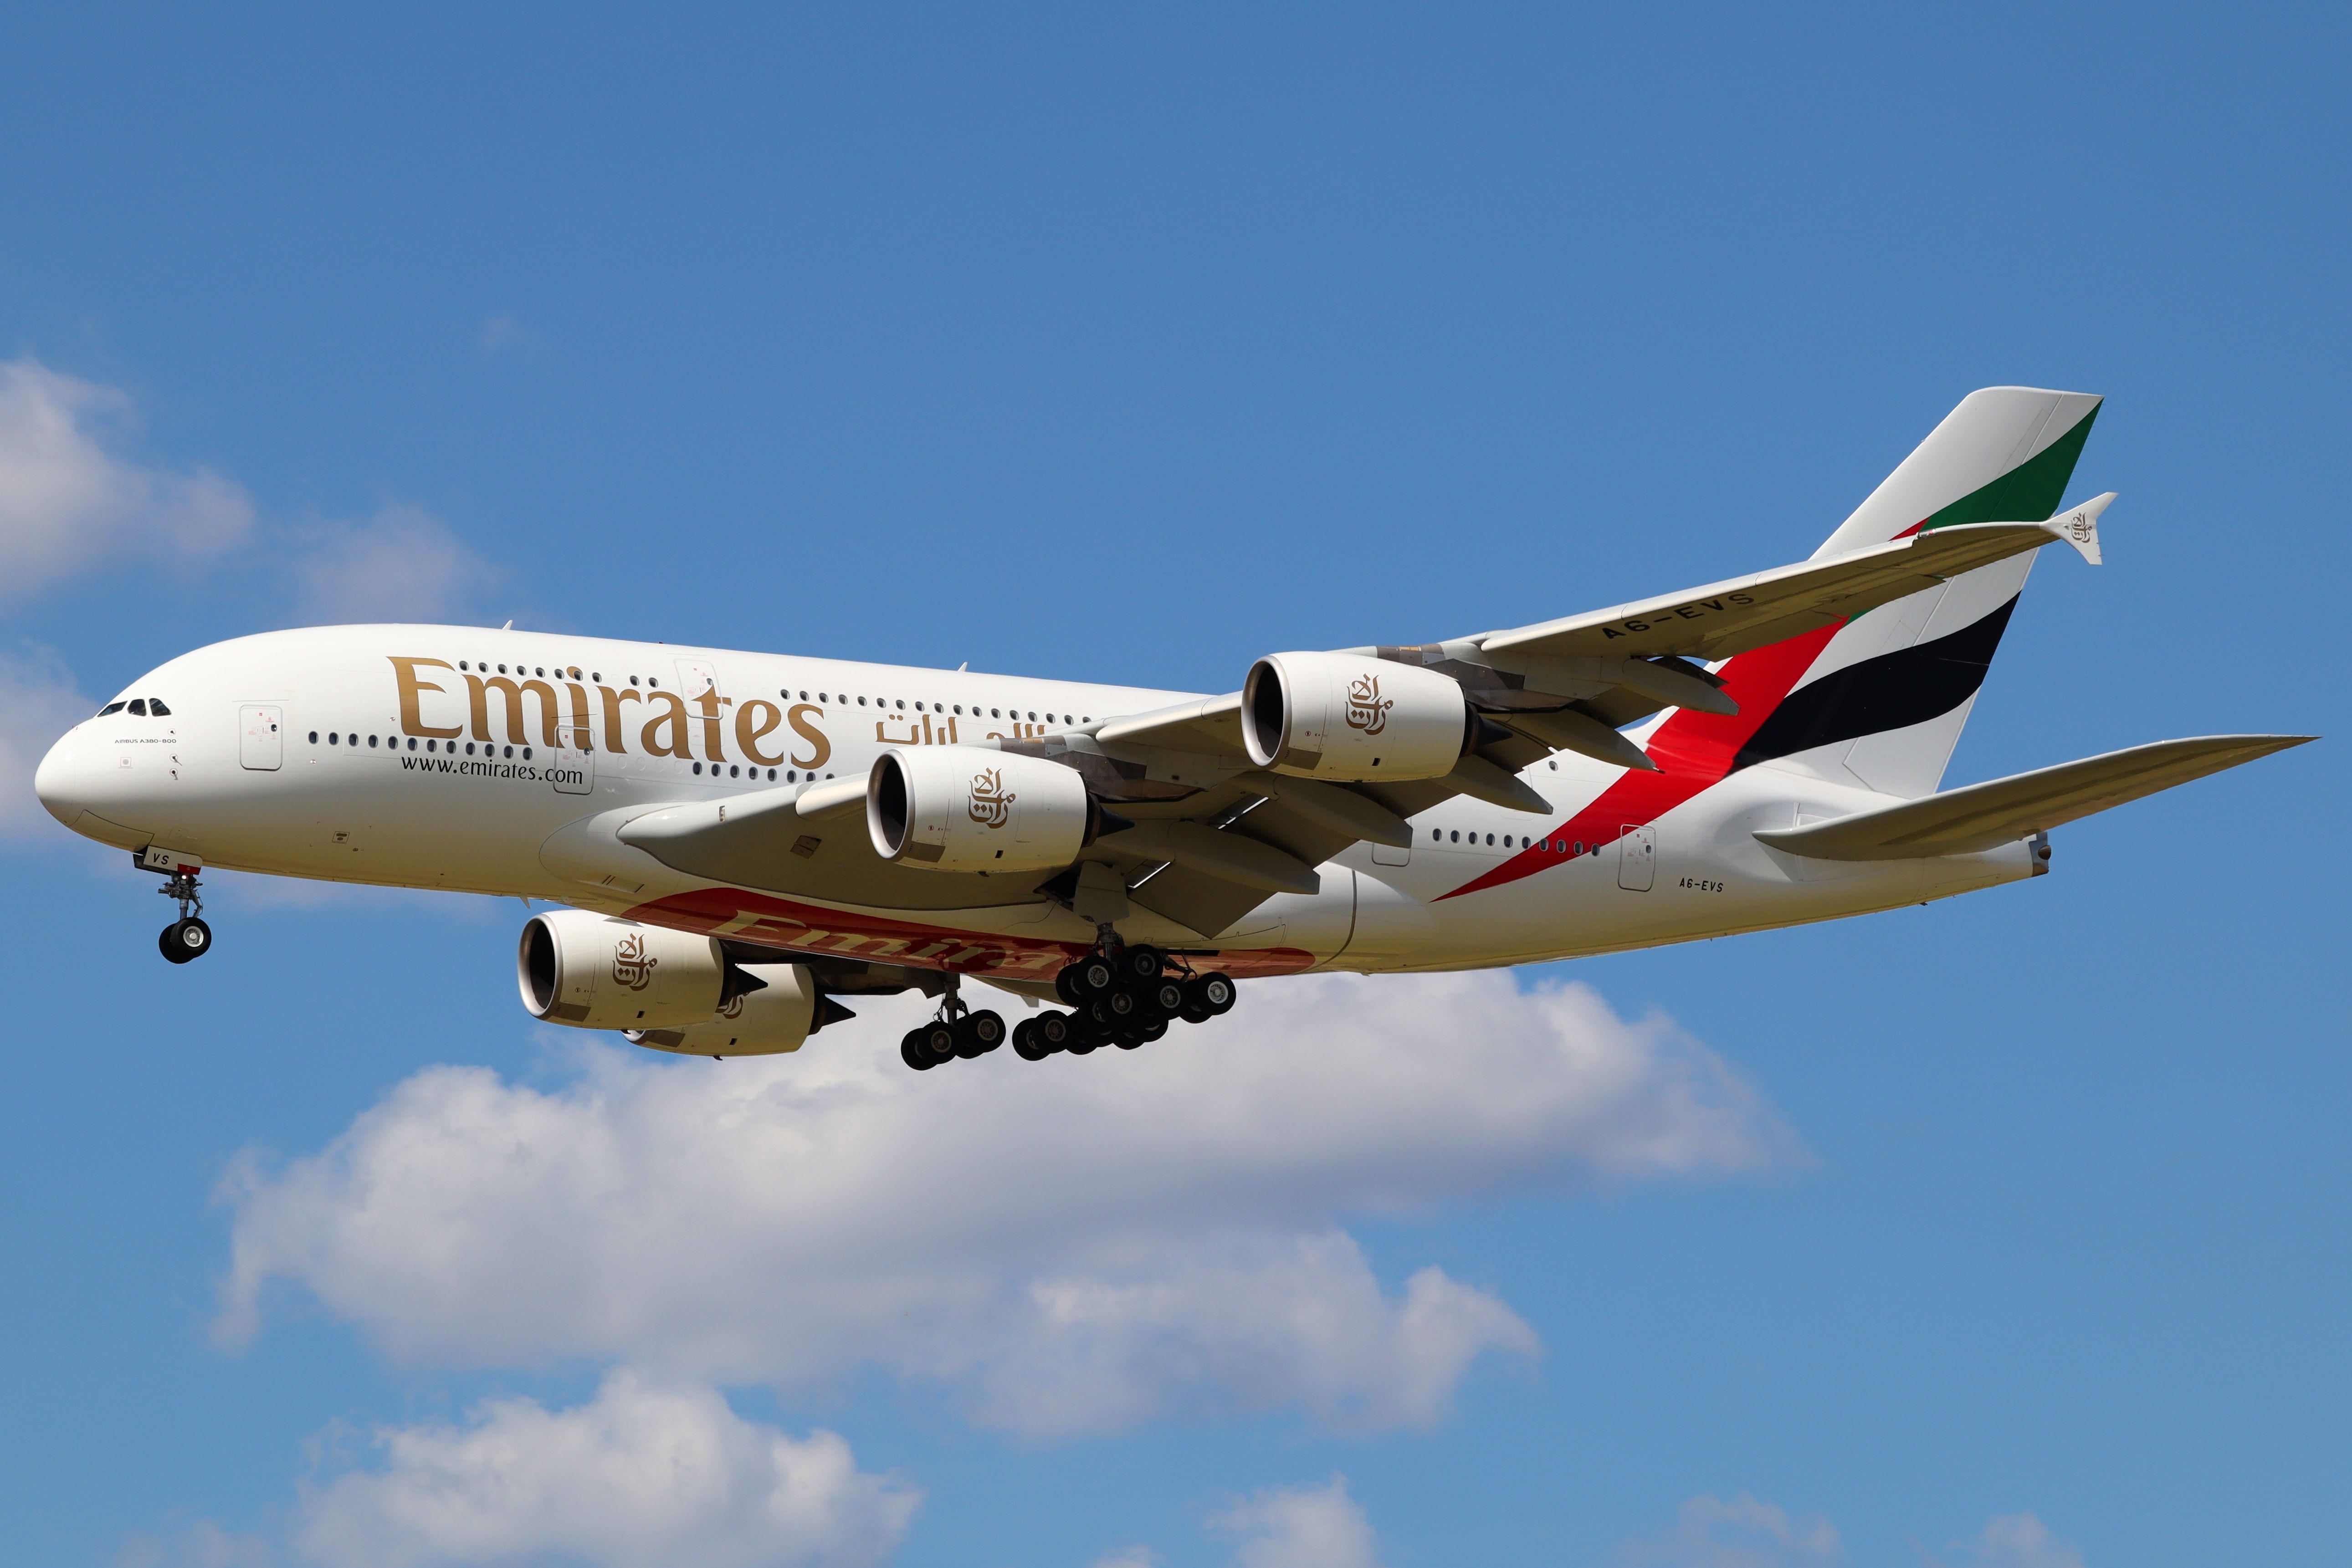 Emirates Airbus A380 lands in Berlin